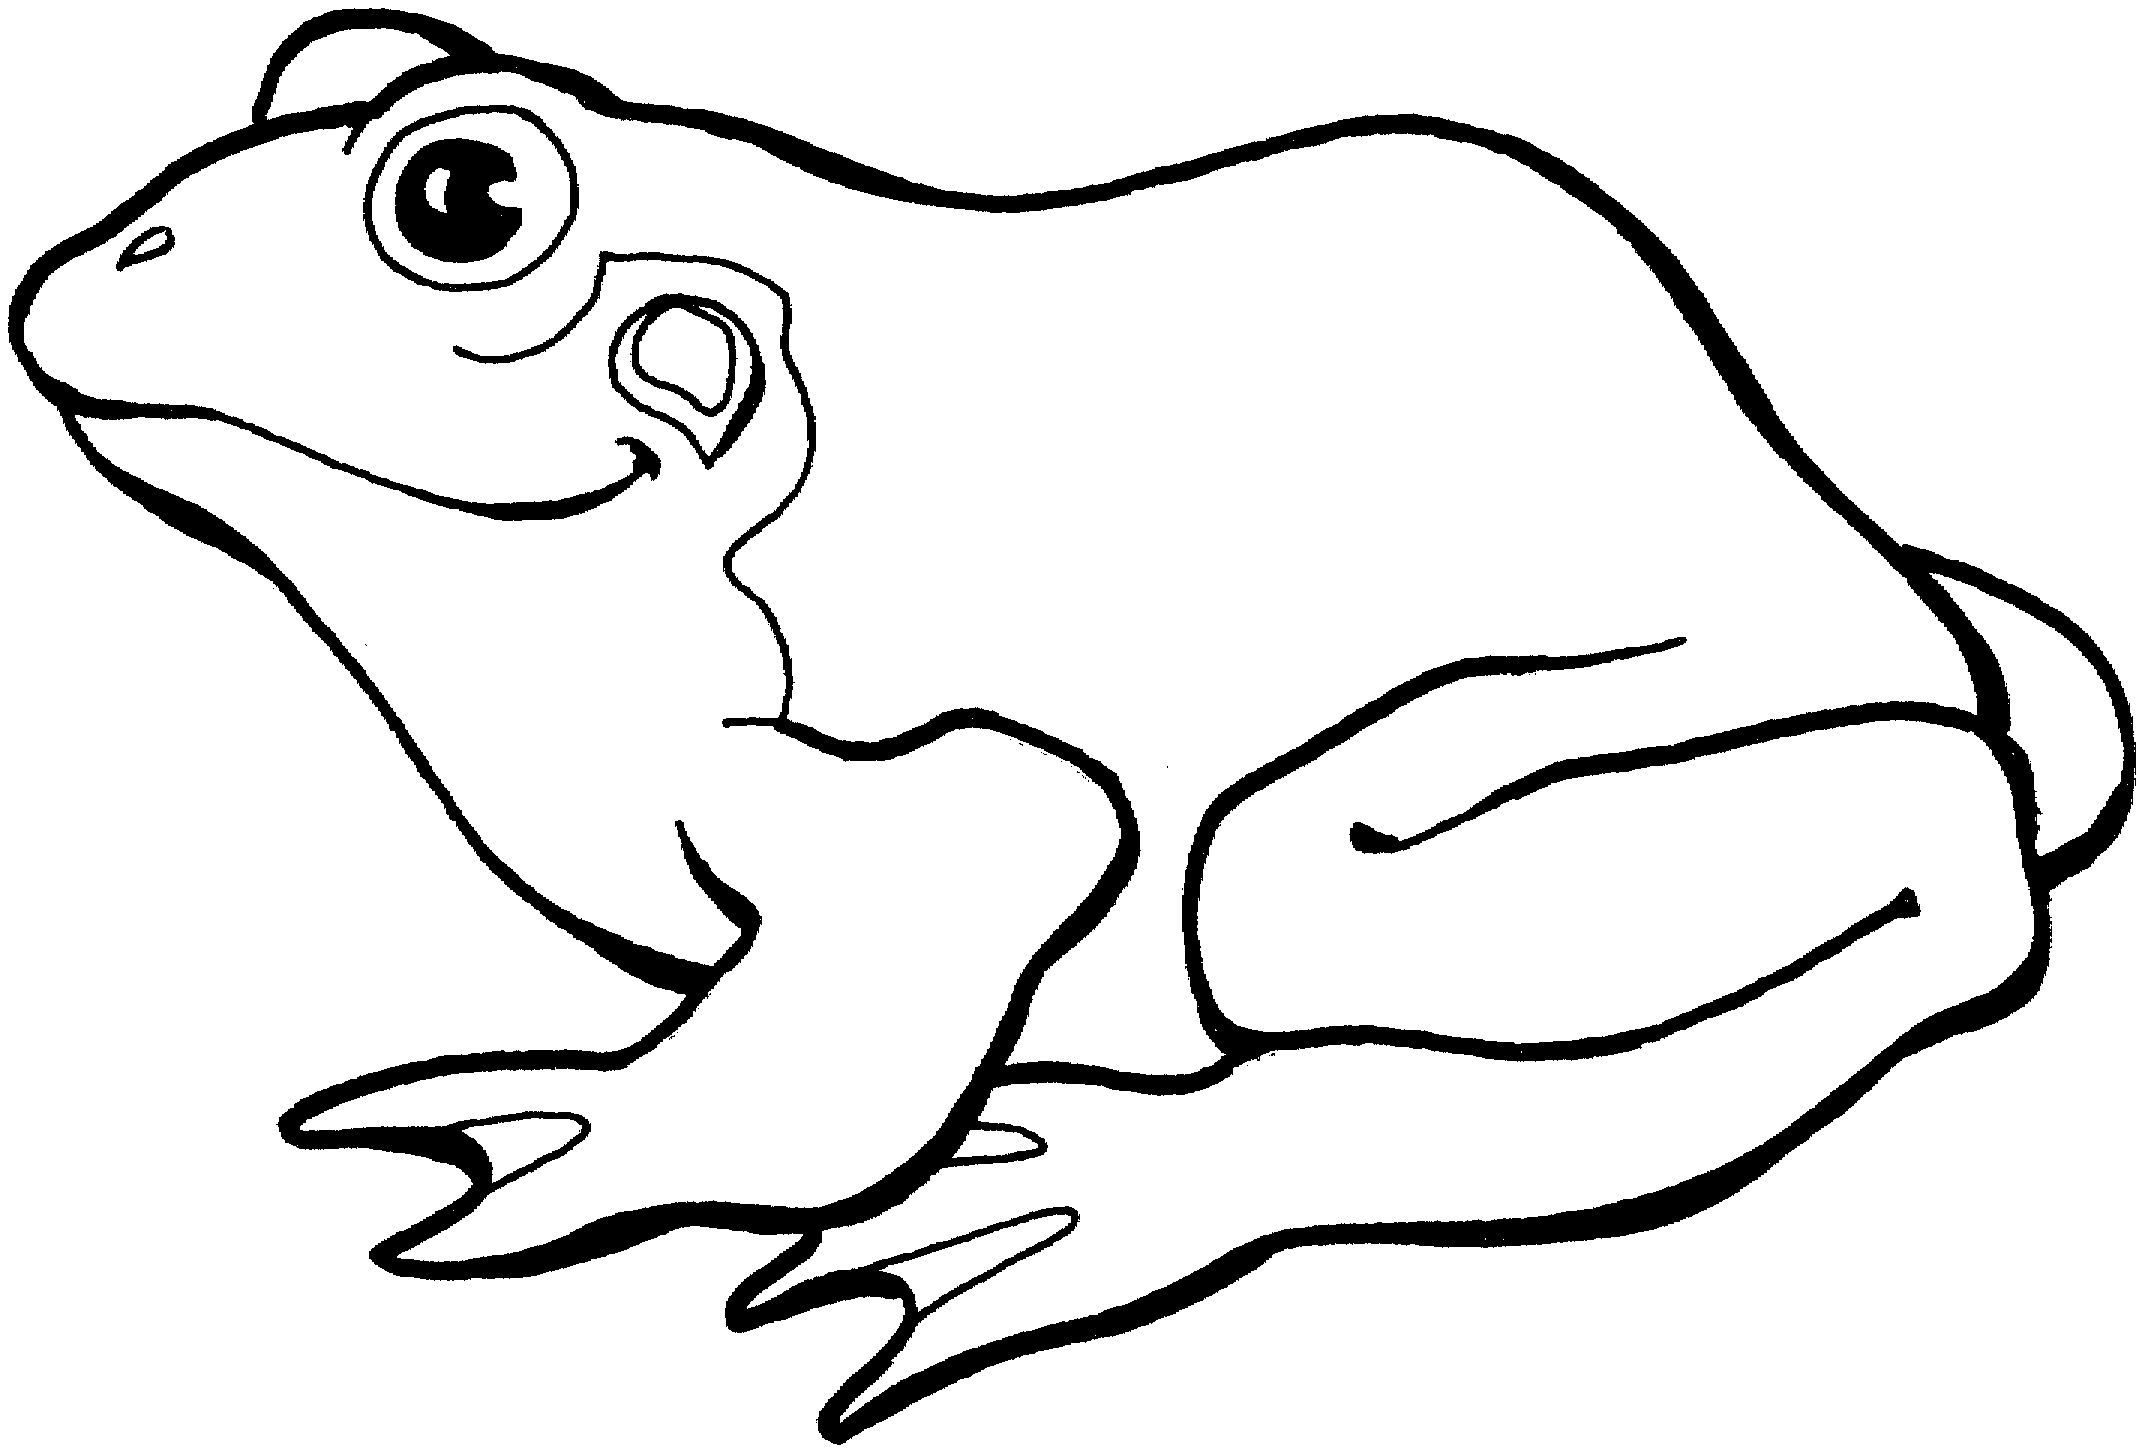 Frog black and white frog clip art black and white free clipart